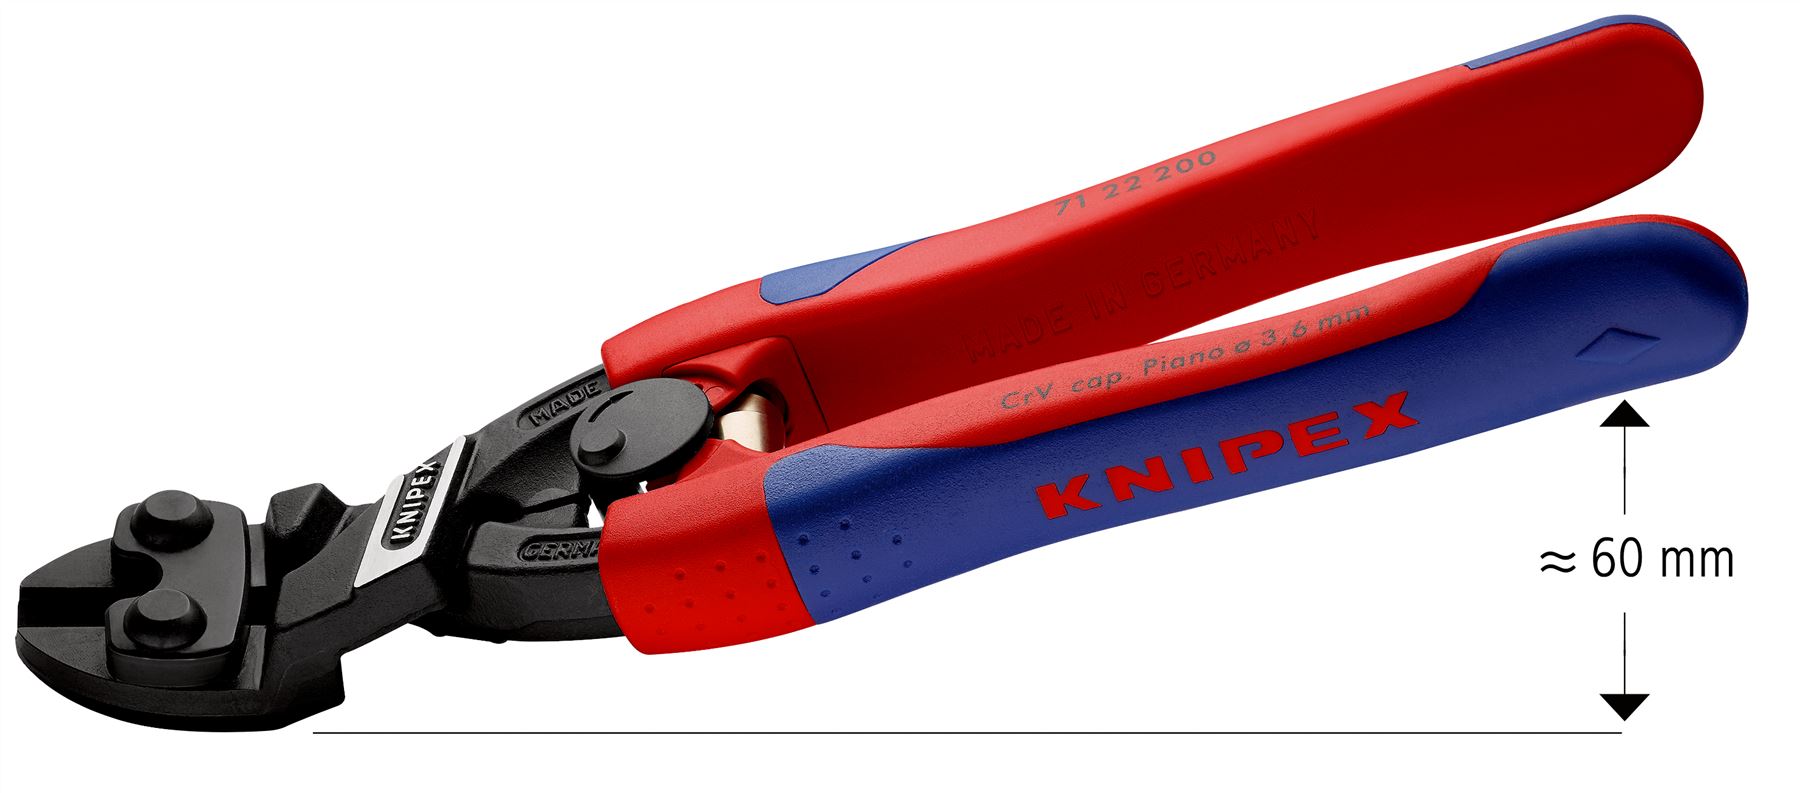 KNIPEX Compact Bolt Cutters CoBolt Cutting Pliers 20° Offset 200mm Multi Component Grips 71 02 200